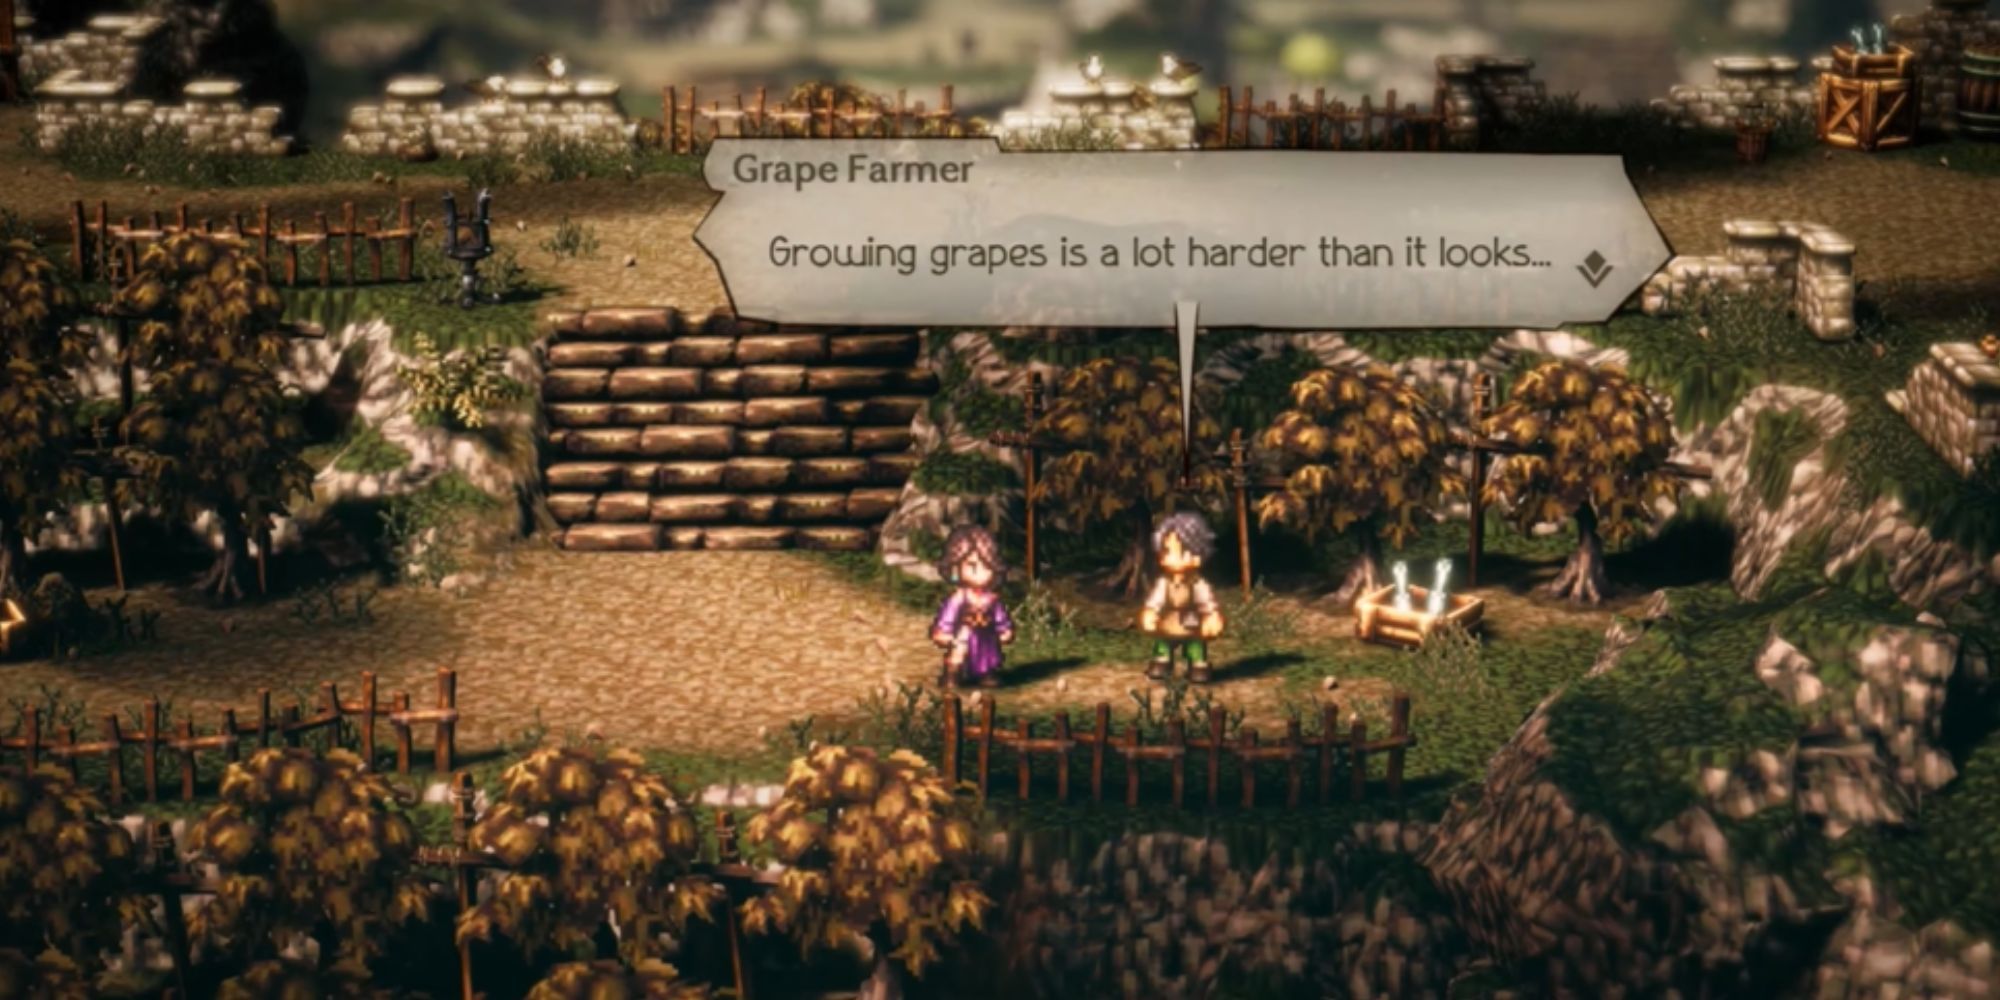 Octopath Traveler II Side Quests guide: Walkthrough for all Side Stories